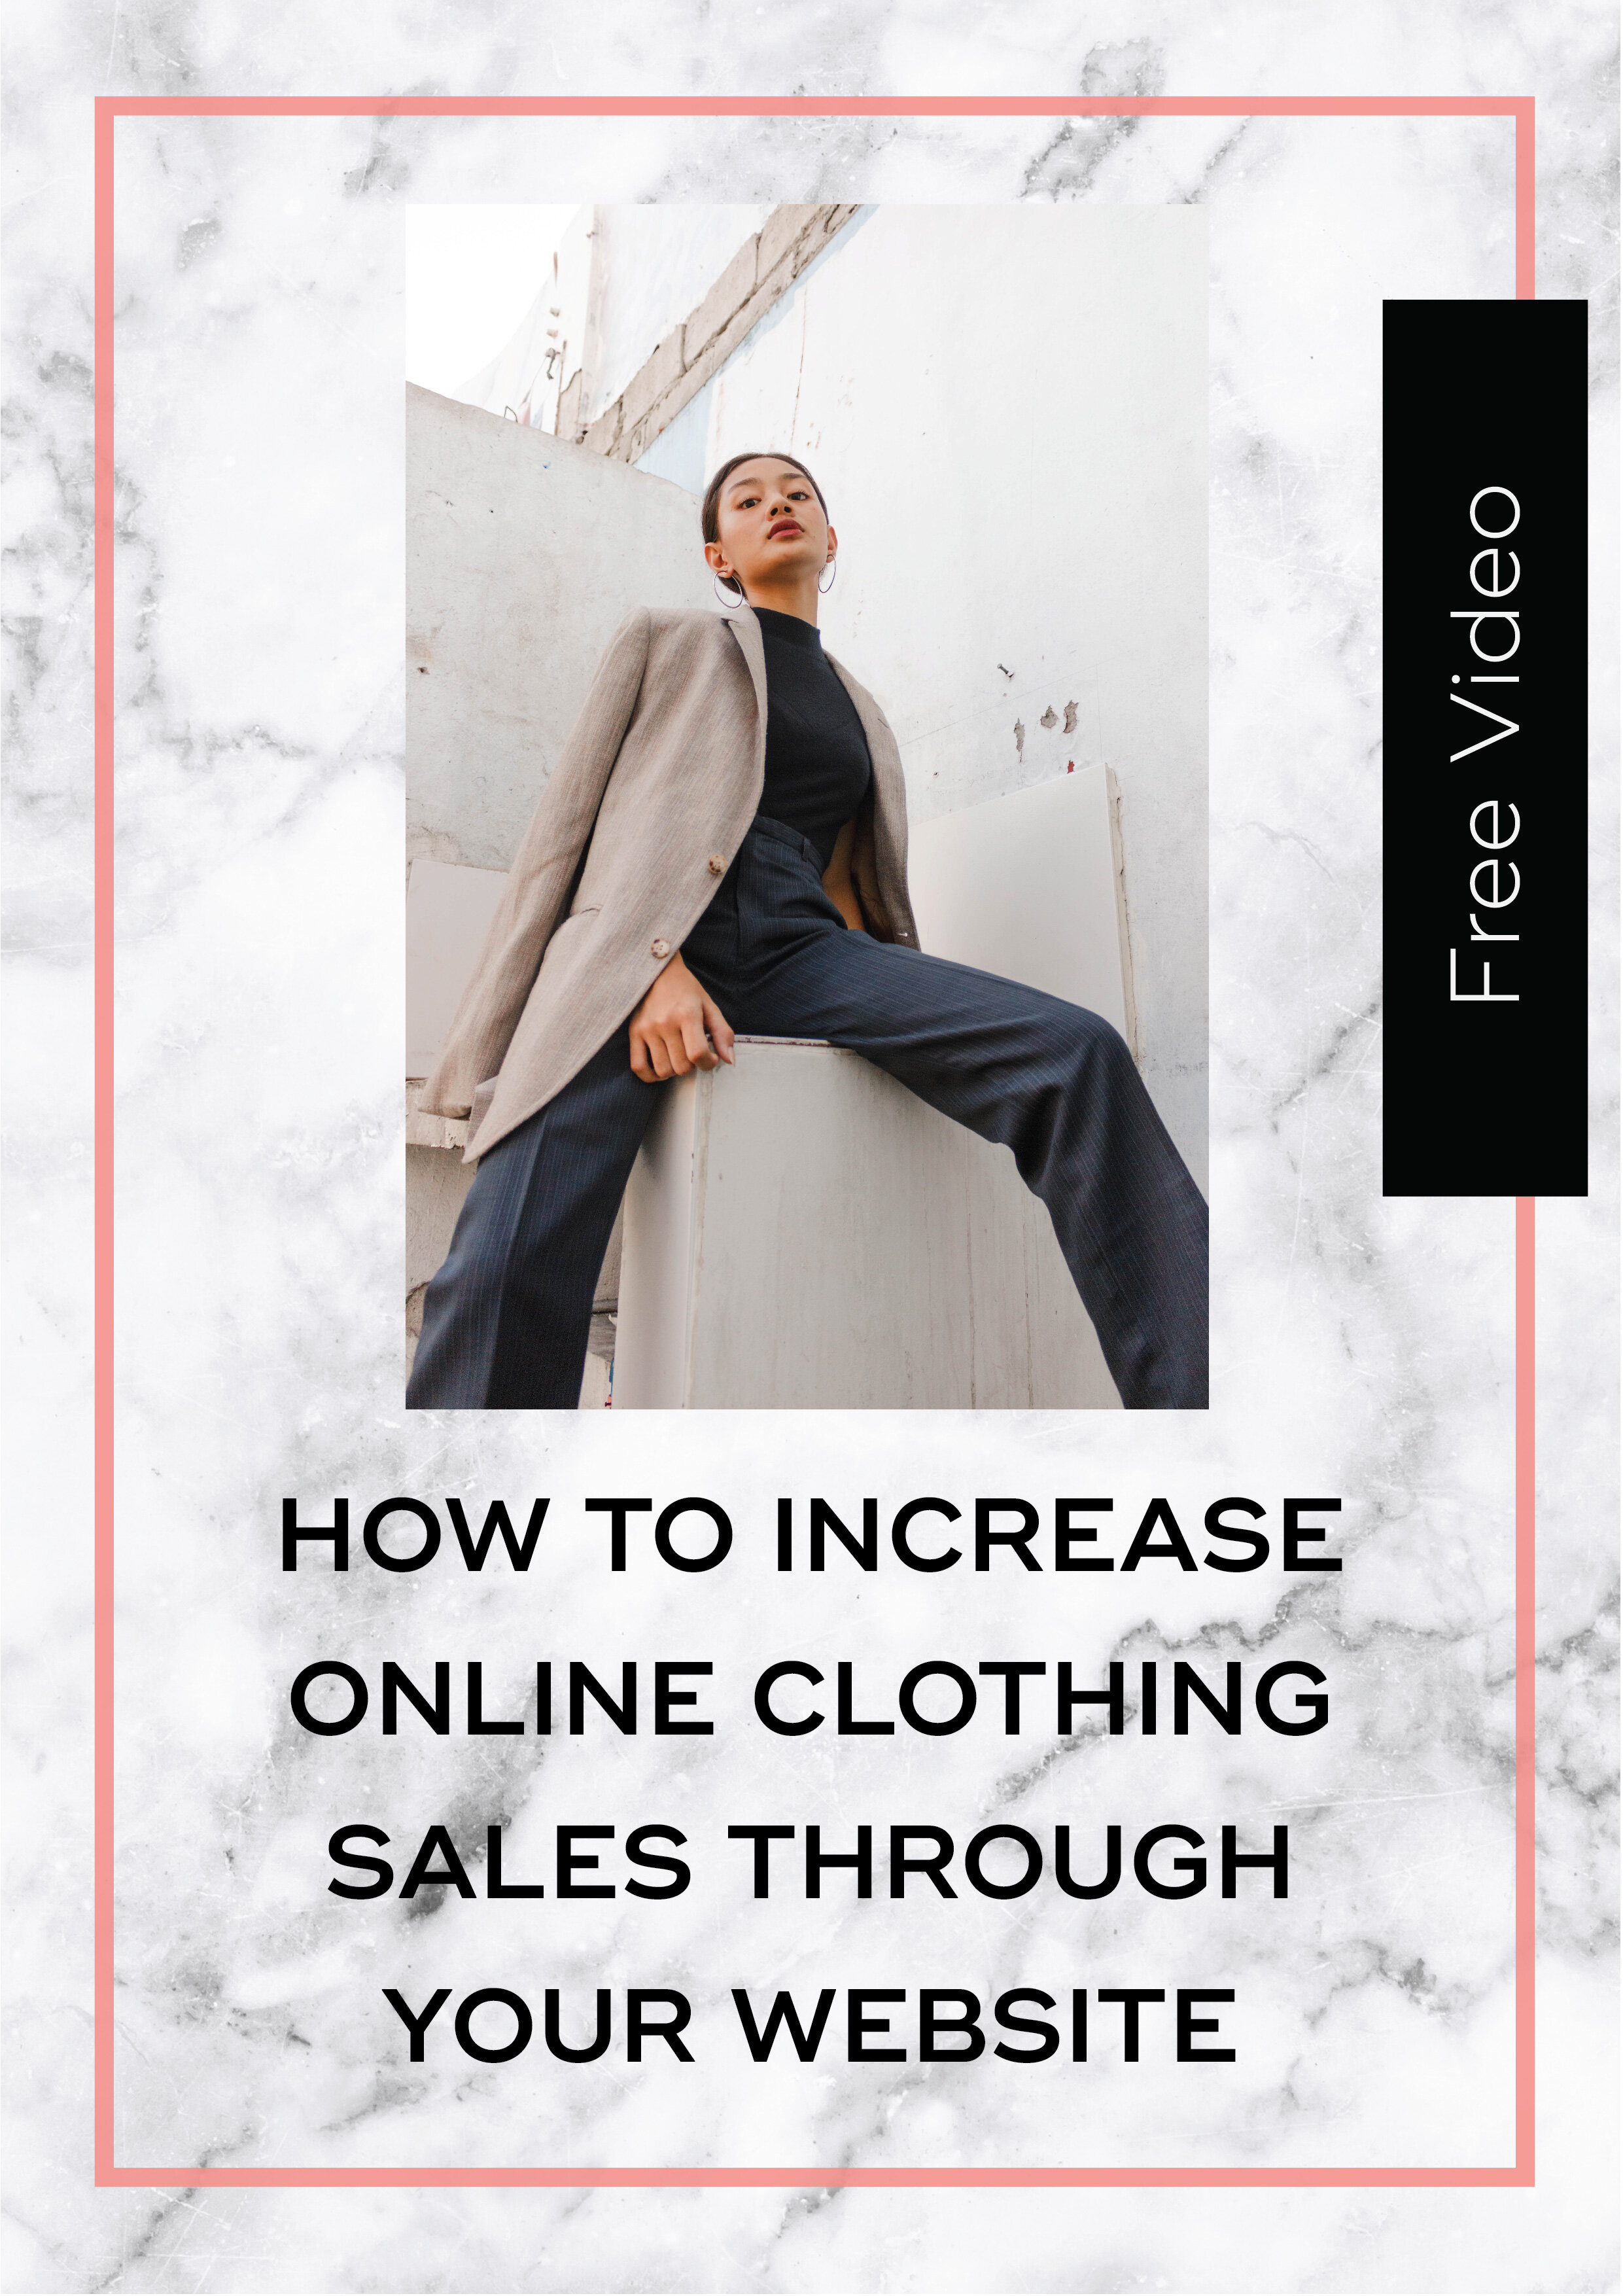 How to Increase Online Clothing Sales Through Your Website2.jpg